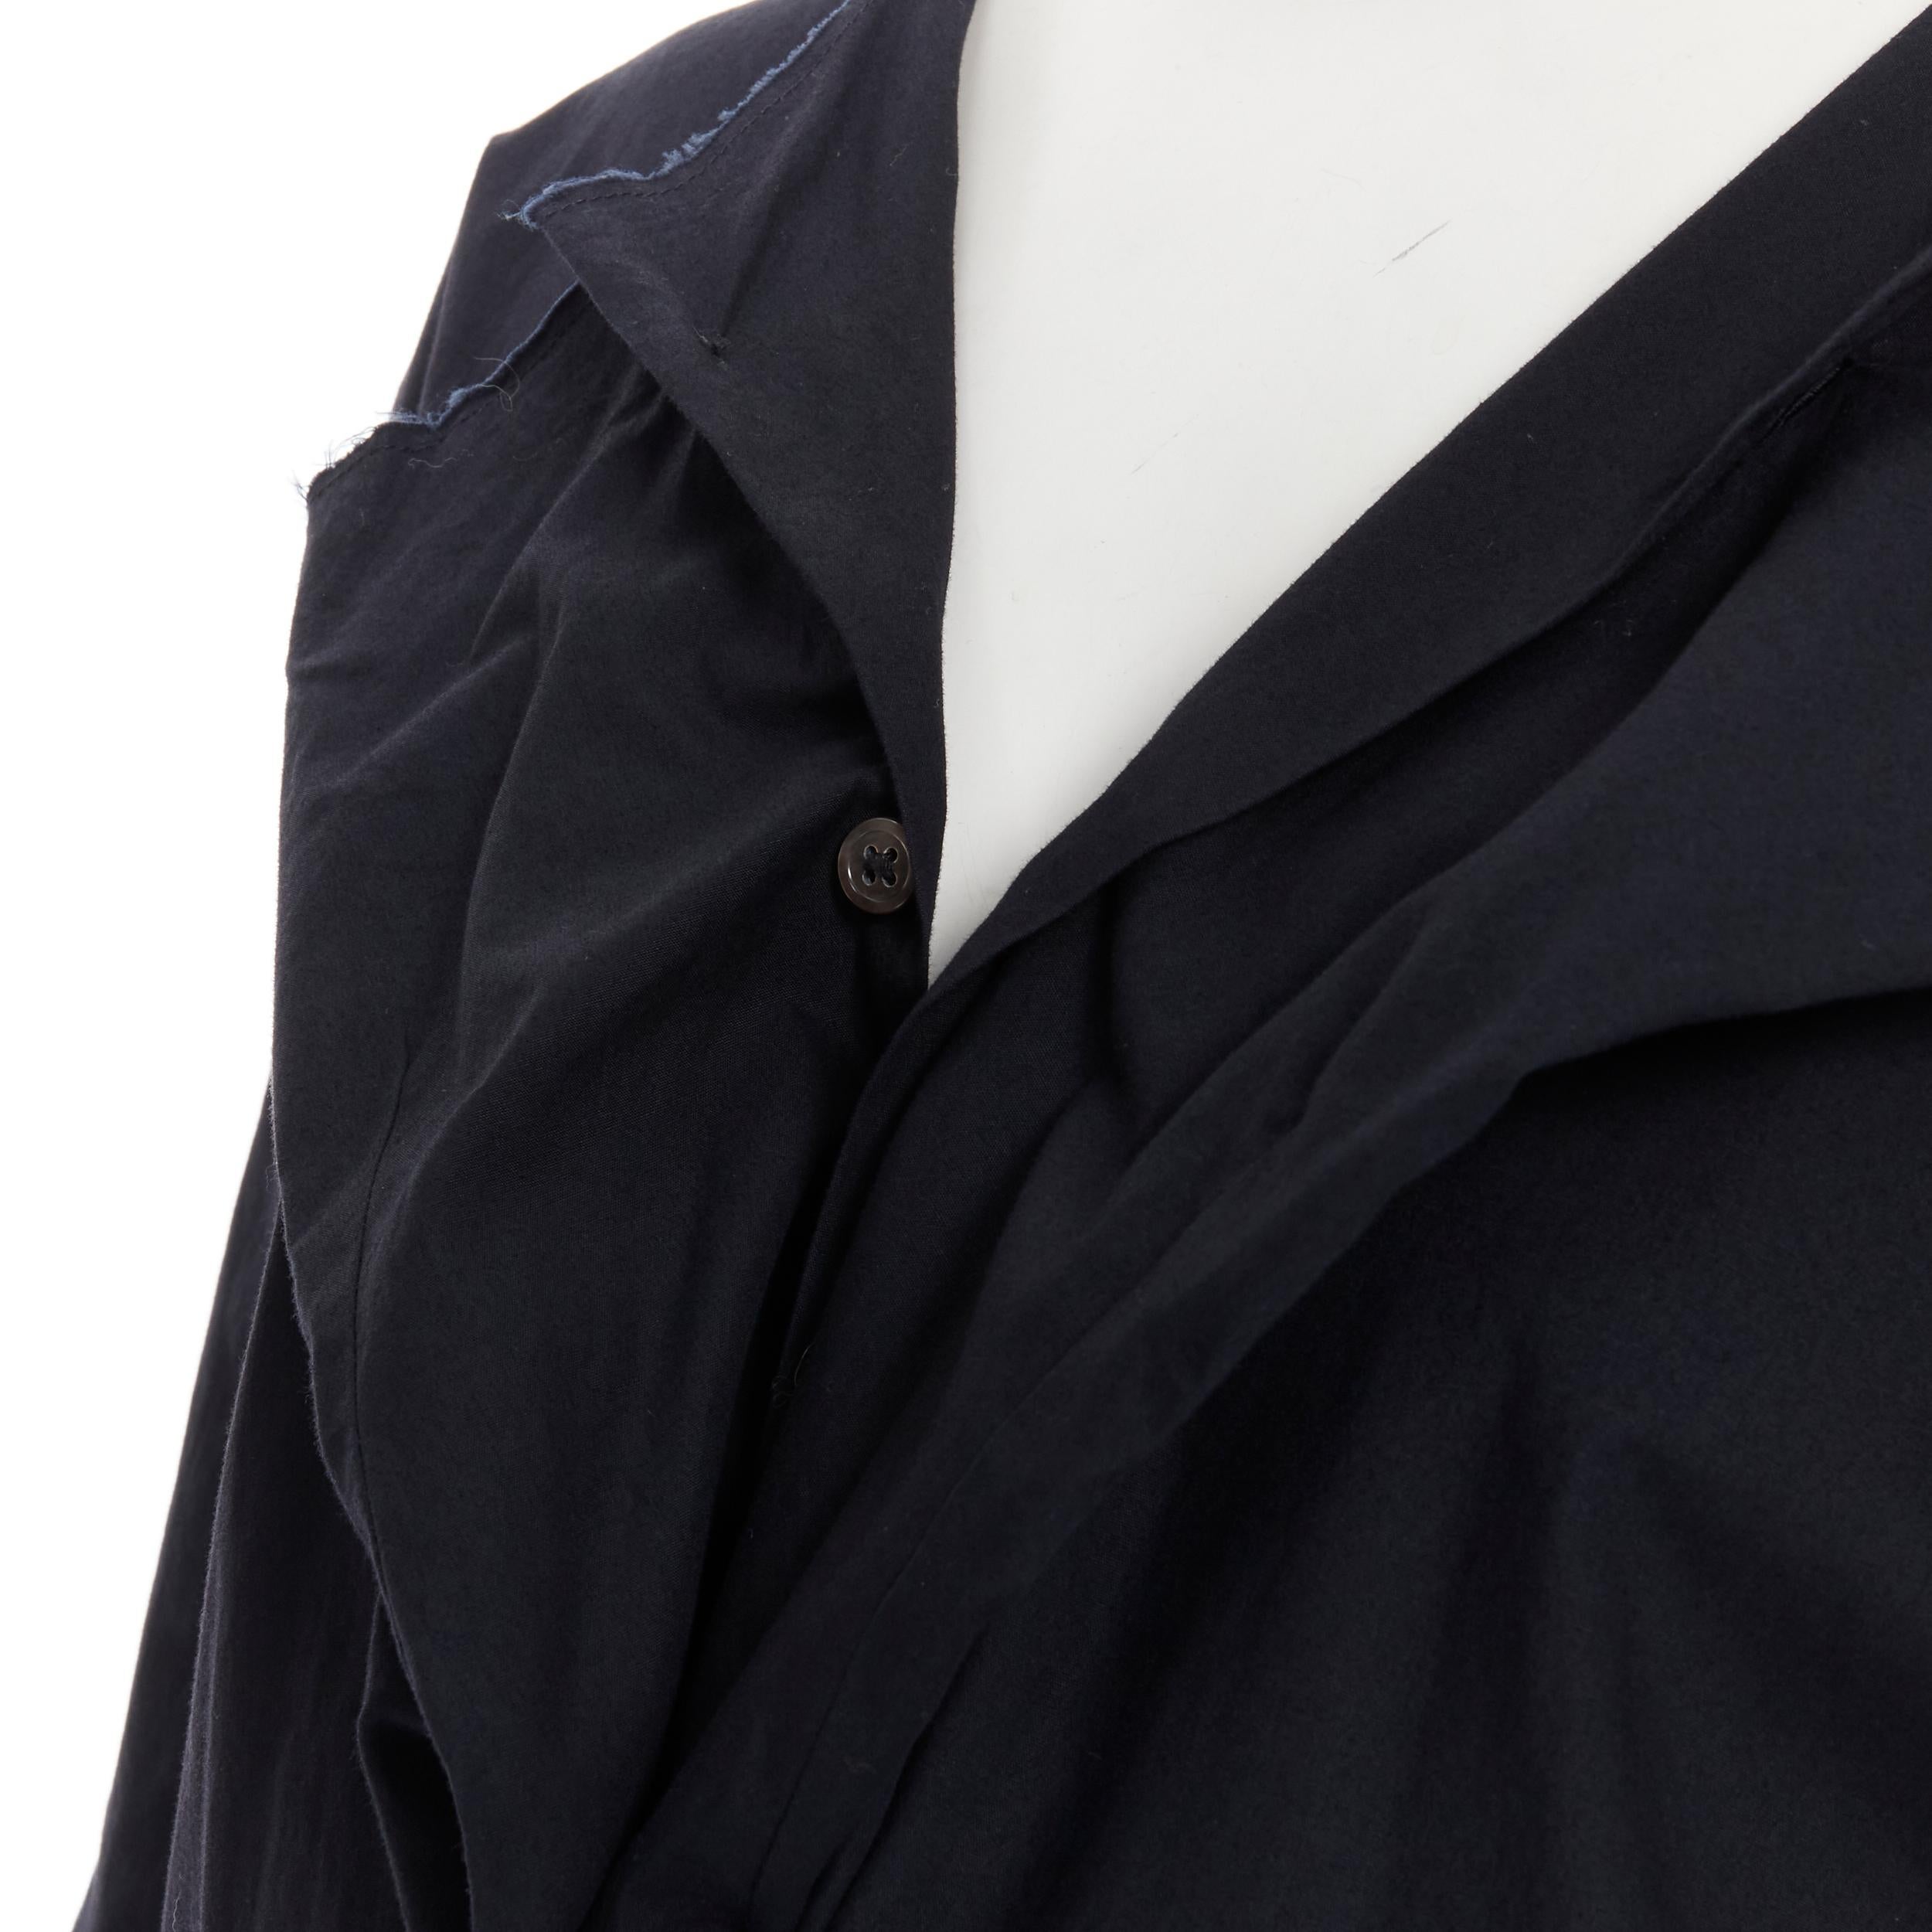 vintage TRICOT COMME DES GARCONS 1997 black draped button tie waist shirt M 
Reference: CRTI/A00292 
Brand: Tricot Comme Des Garcons 
Collection: 1997 
Material: Cotton 
Color: Black 
Pattern: Solid 
Closure: Button 
Extra Detail: Draped collar.